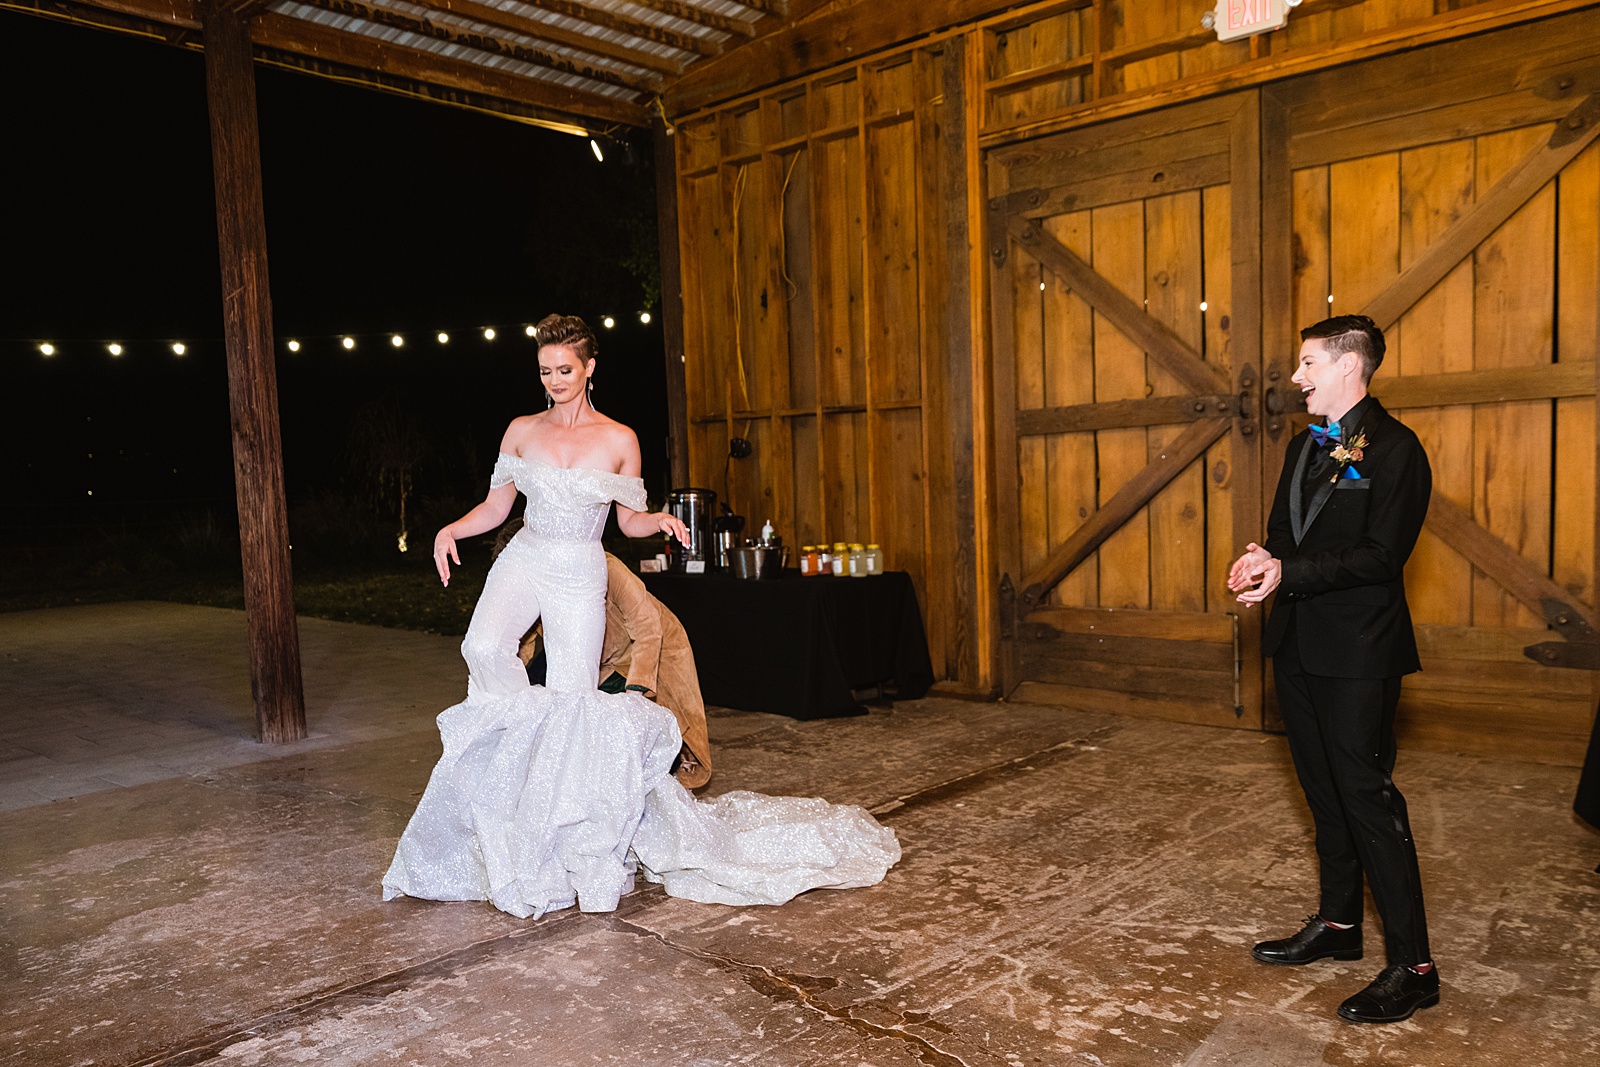 Bride changes out of wedding dress into wedding suit before dancing with guests at Mortimer Farms wedding reception by Prescott wedding photographer PMA Photography